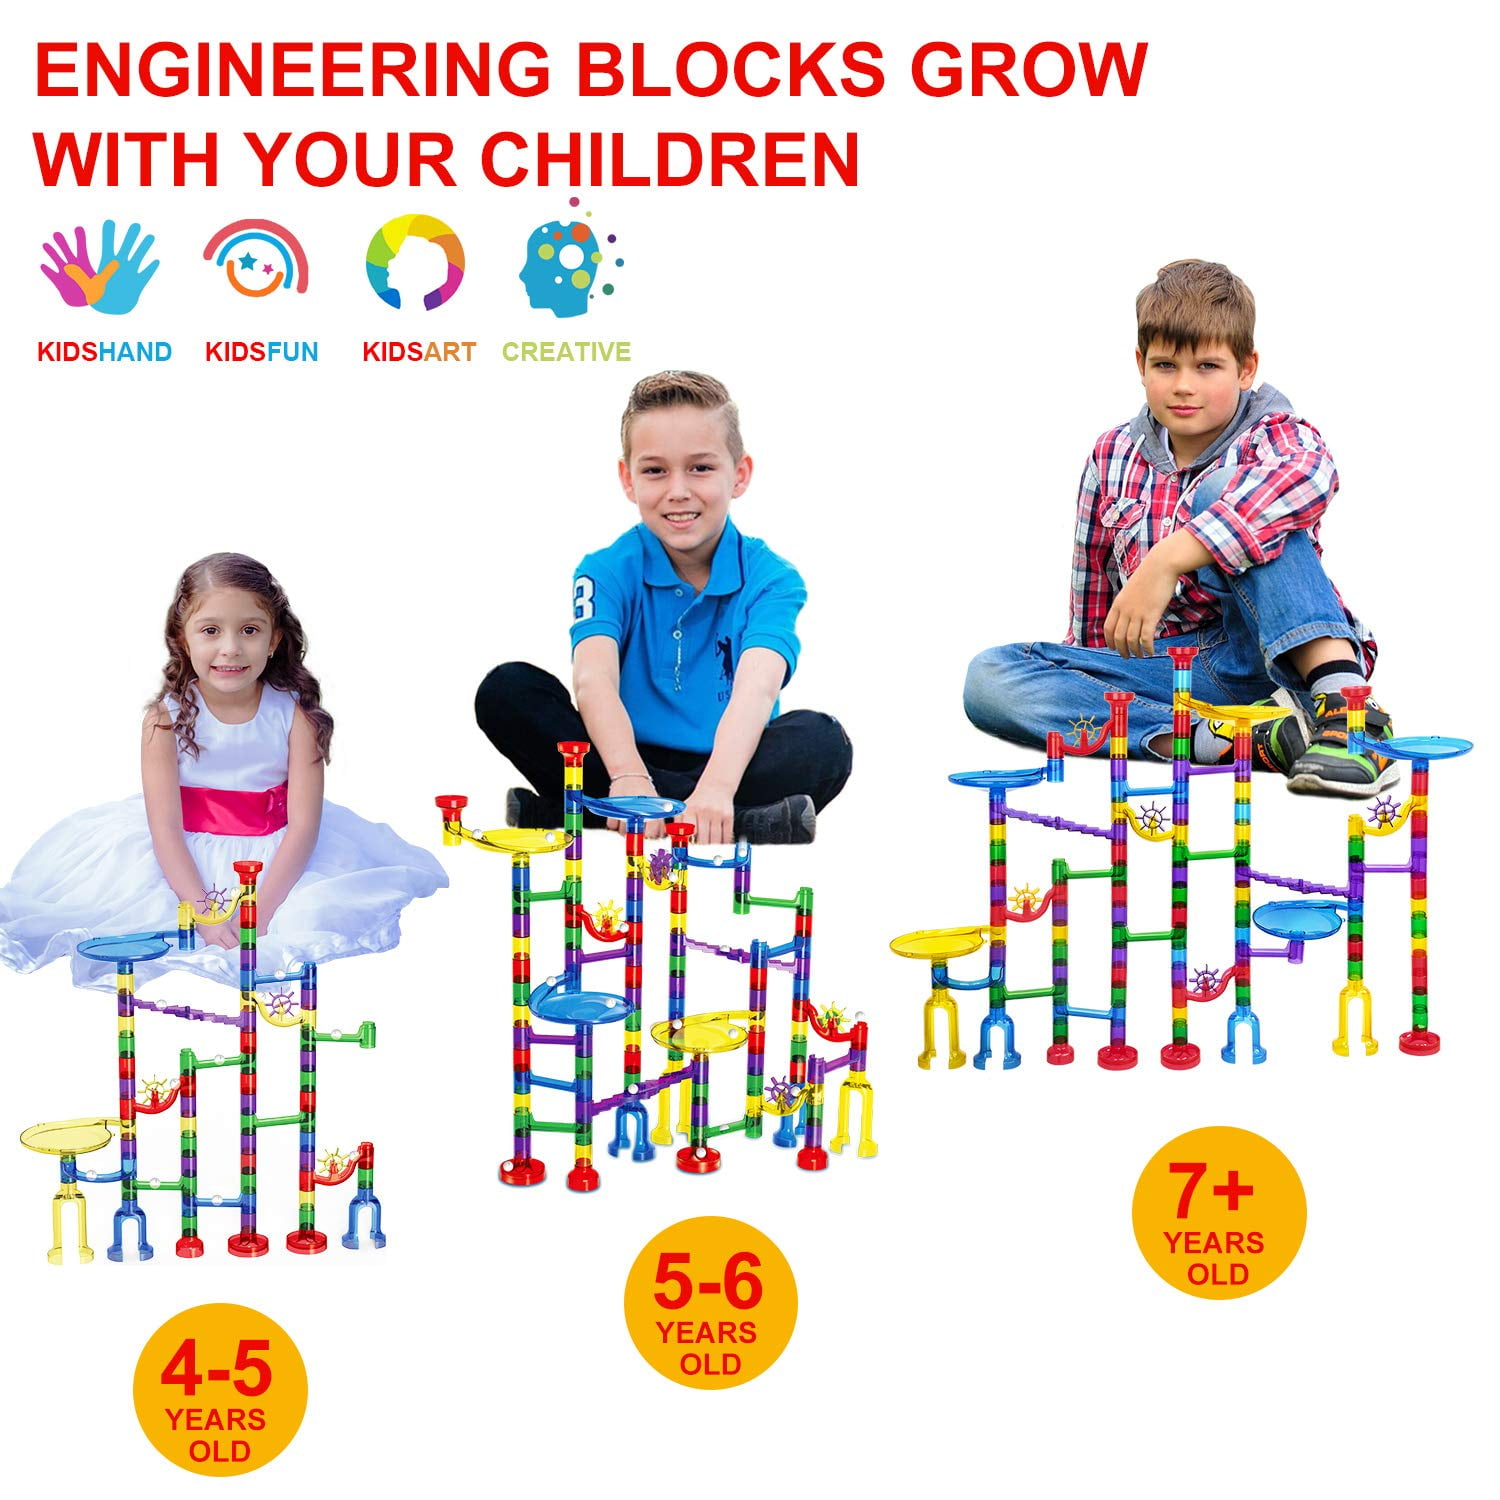 Stem Toy Bricks Set For Boys Girls Age 3 4 5 6 7 8+ WYSWYG Marble Run Set Building Blocks Classic Big Blocks-178 Pcs Marble Race Tracks With 8 Marbles & 2 Baseplates Compatible With All Major Brands 